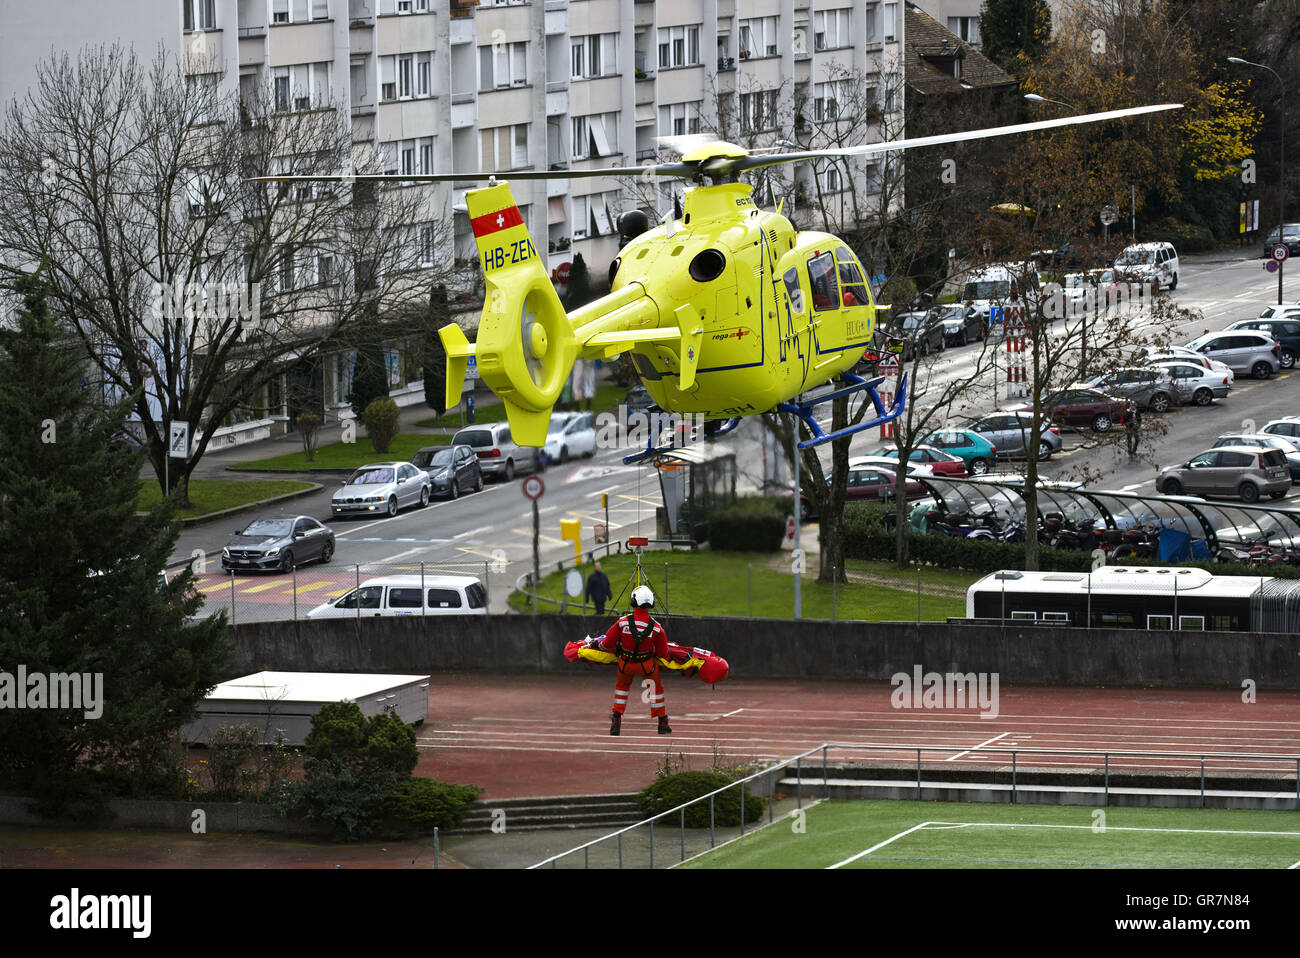 Rescue Helicopter Eurocopter Ec135 T2 Of The Geneva University Hospital In An Emergency Action In Urban Stock Photo